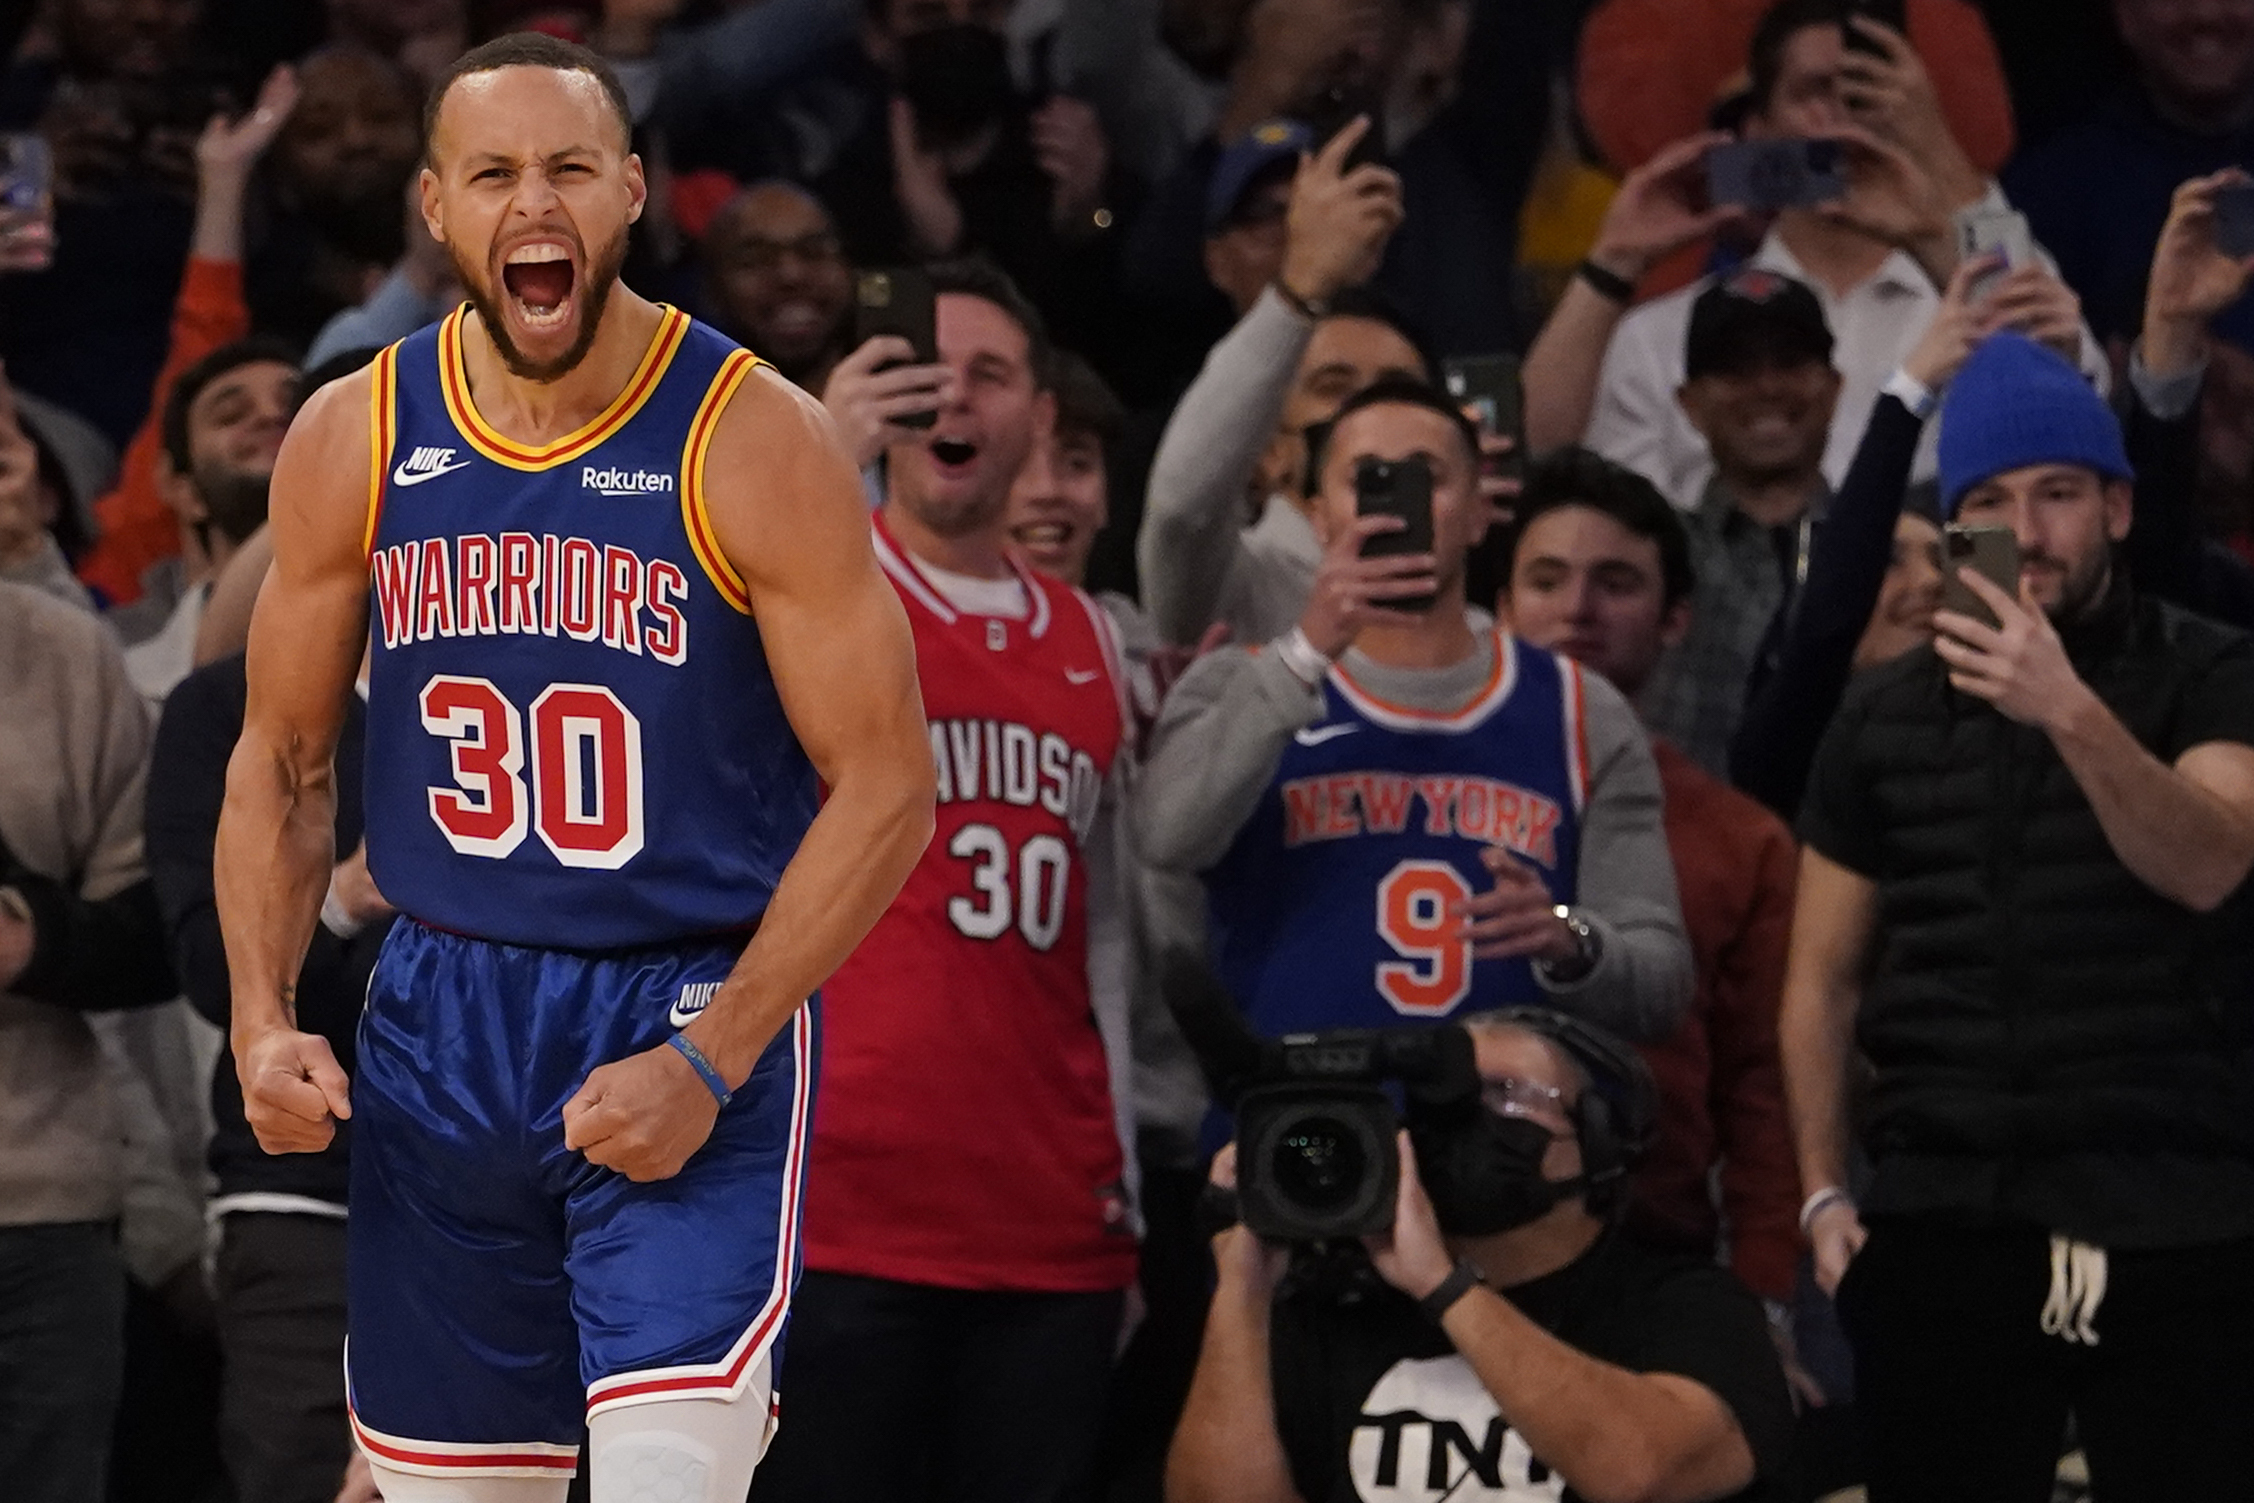 Golden State Warriors guard Stephen Curry reacts after scoring a 3-point basket during game against New York, Dec. 14, 2021.